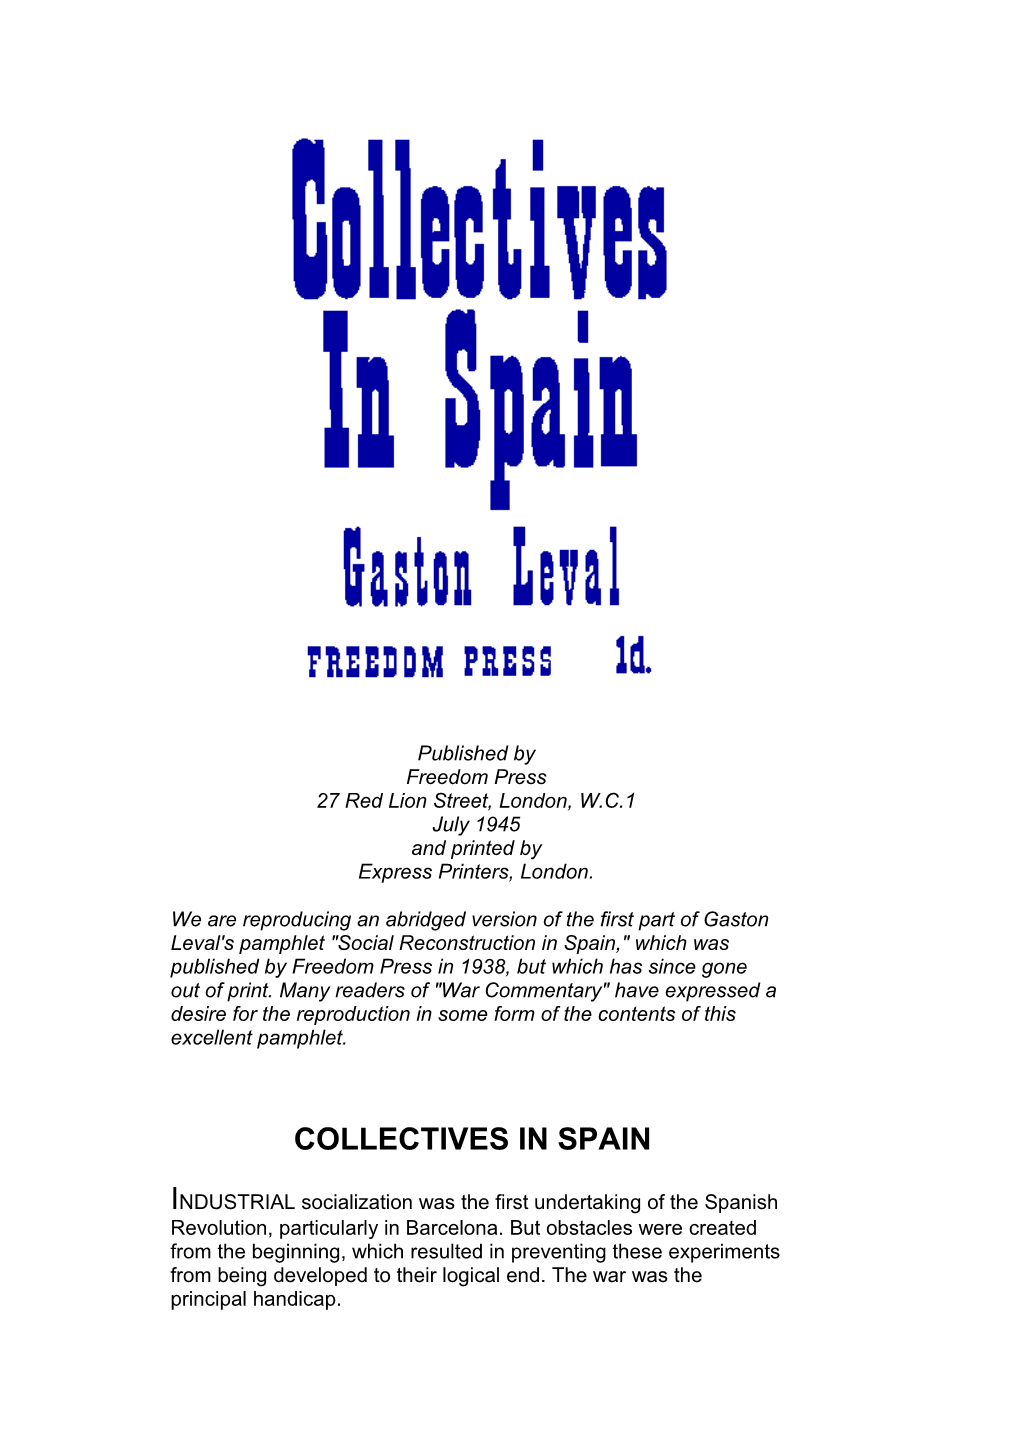 Collectives in Spain